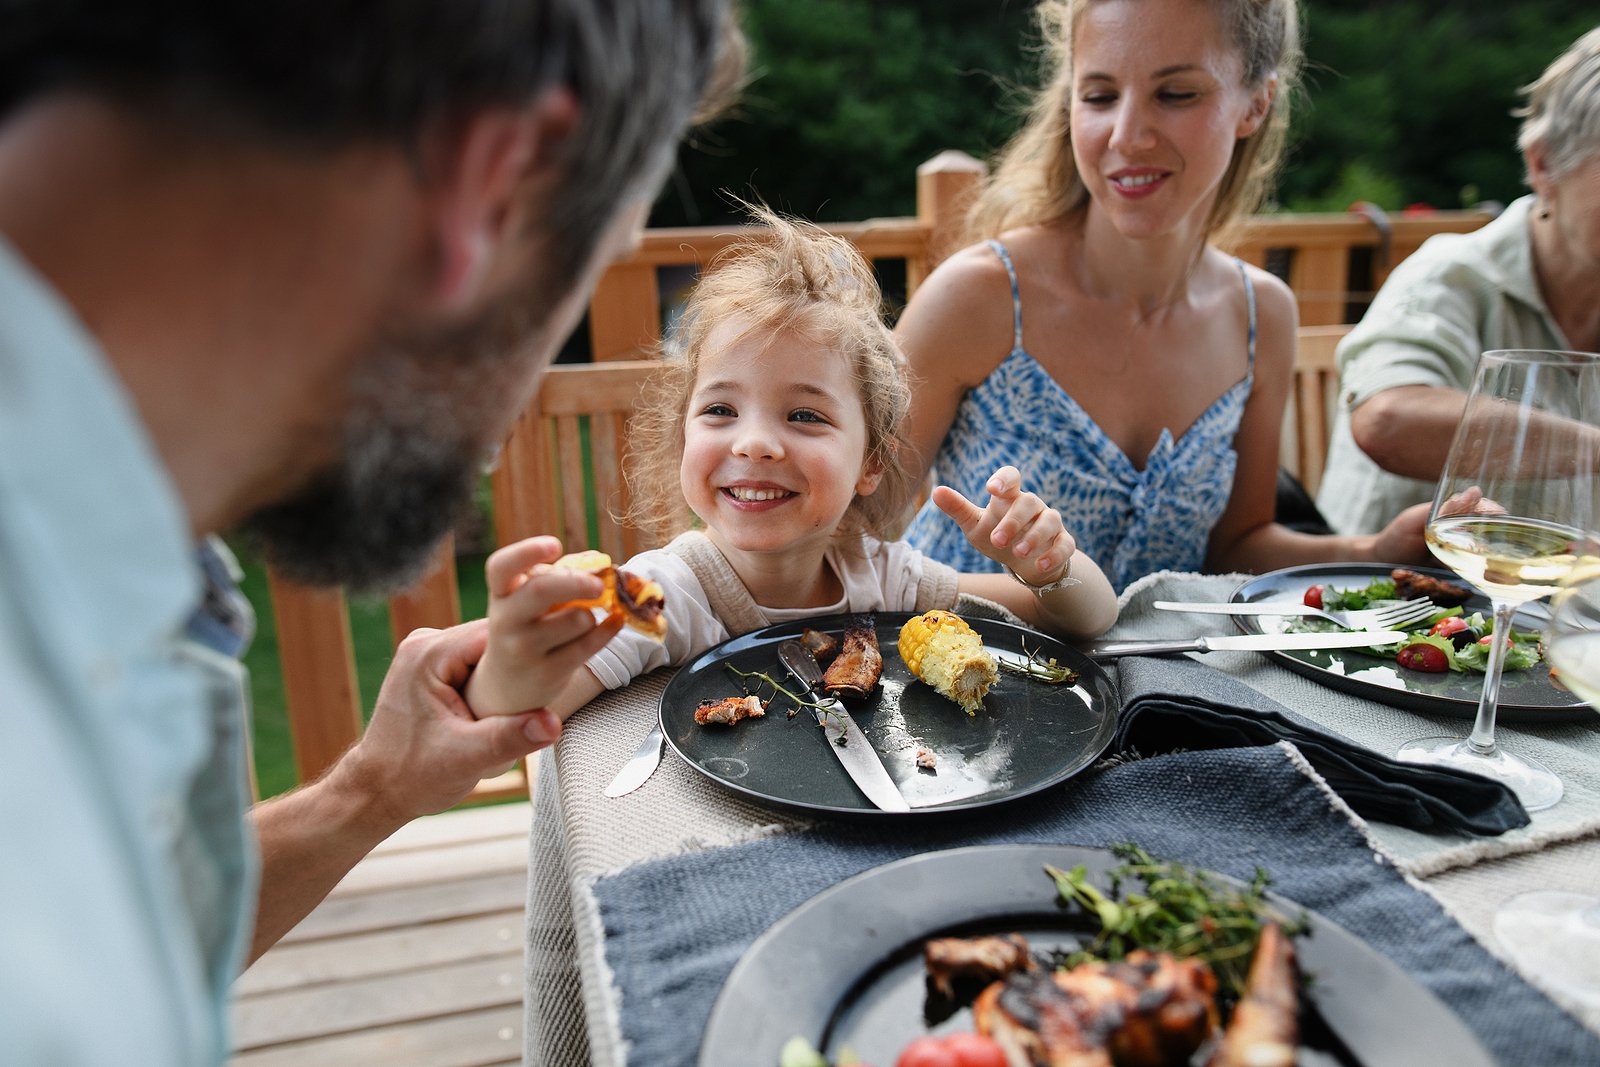 bigstock-Family-Eating-At-Barbecue-Part-456798265